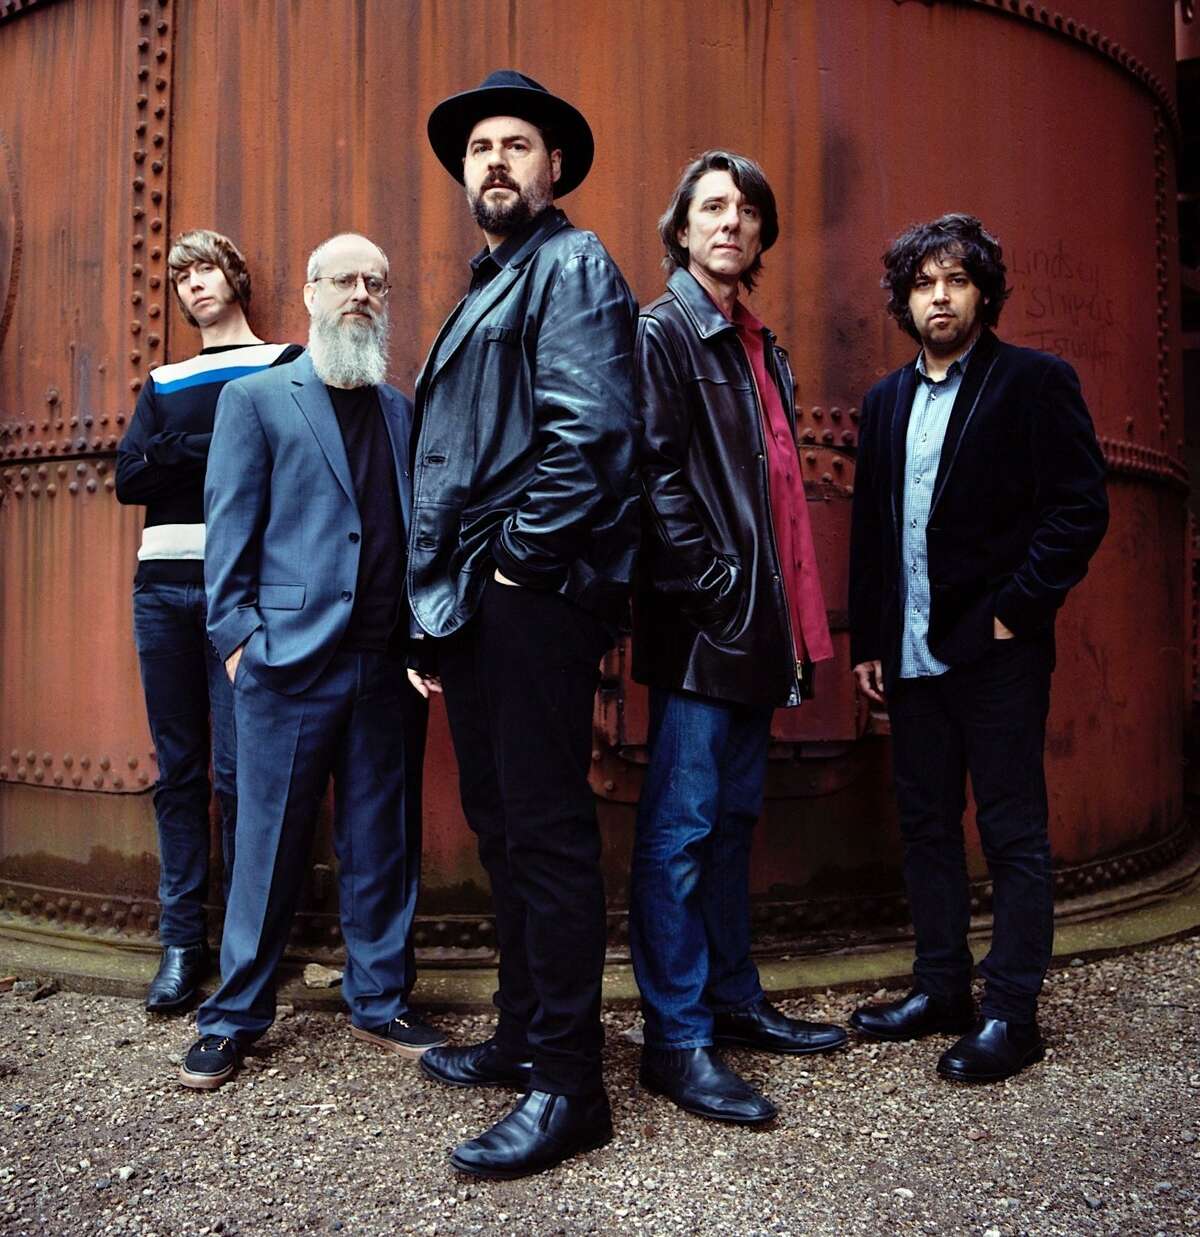 The Drive By Truckers are set to return to Infinity Hall in Hartford June 23. This southern rock band was founded in 1996 by singer, songwriter and guitarists Mike Cooley and Patterson Hood and they have long held a progressive fire in their belly.